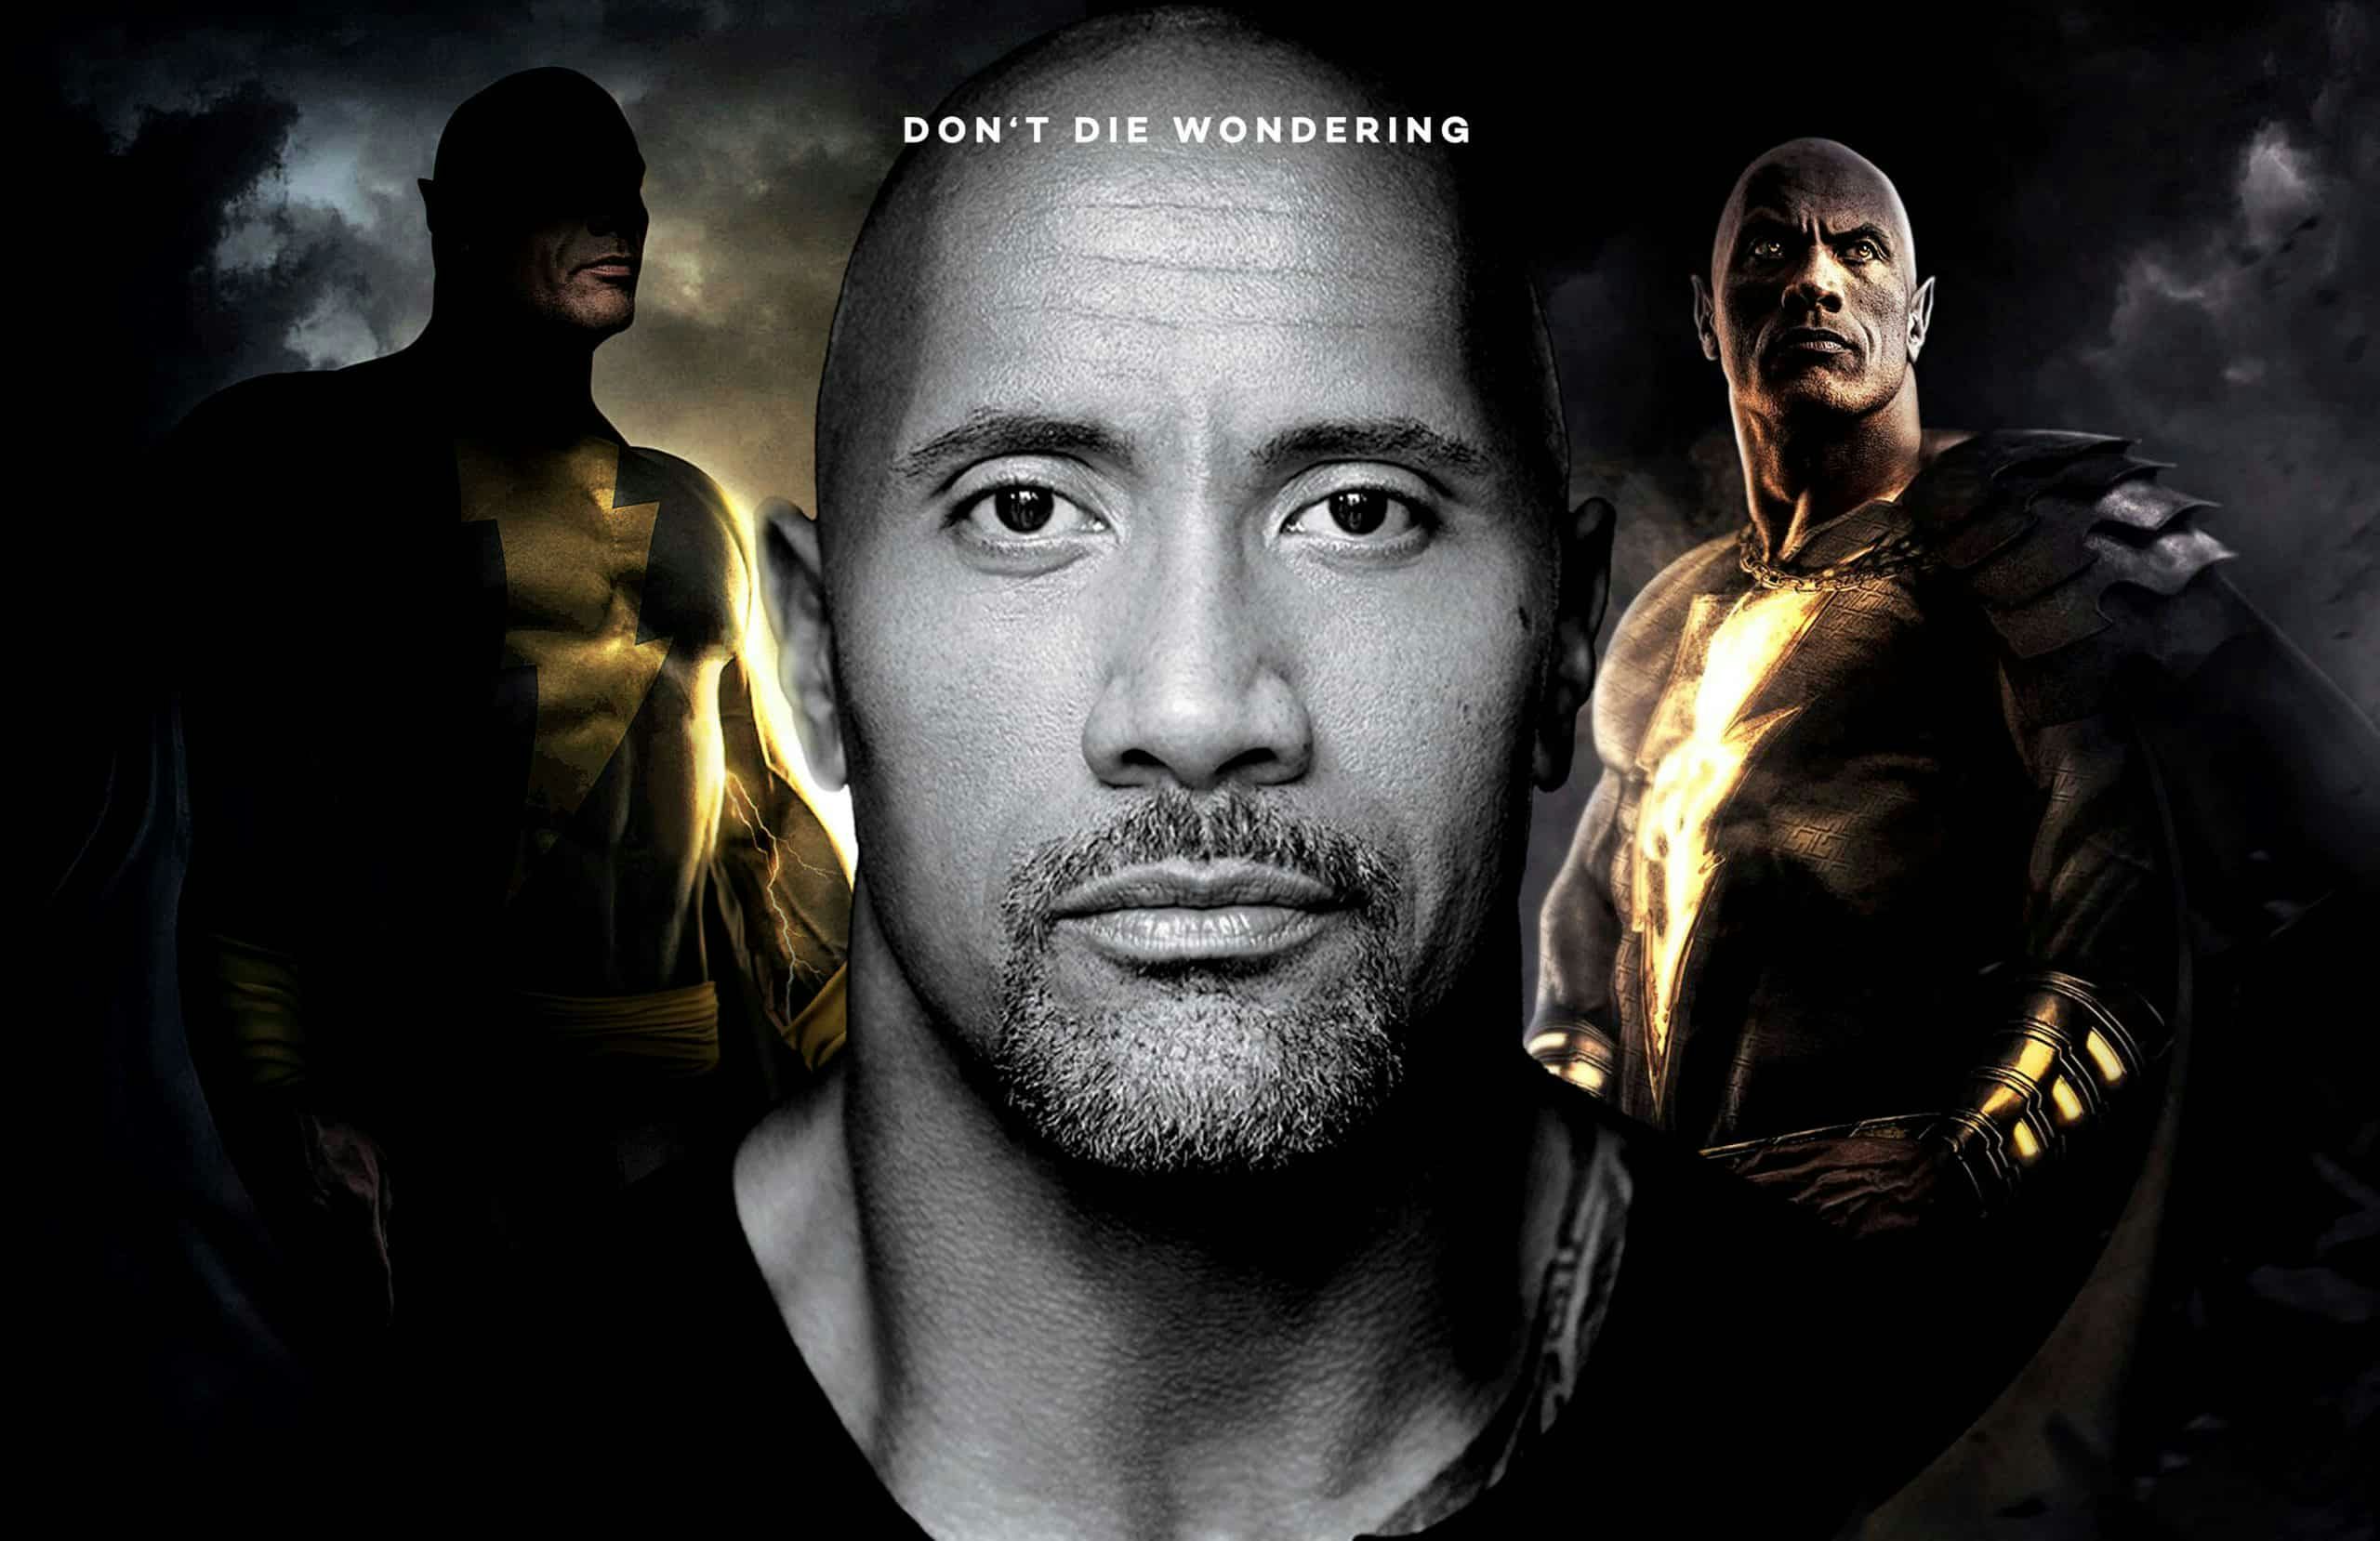 Dwayne Johnson Is Back In Action | The Rock’s DC Debut Revealed And More